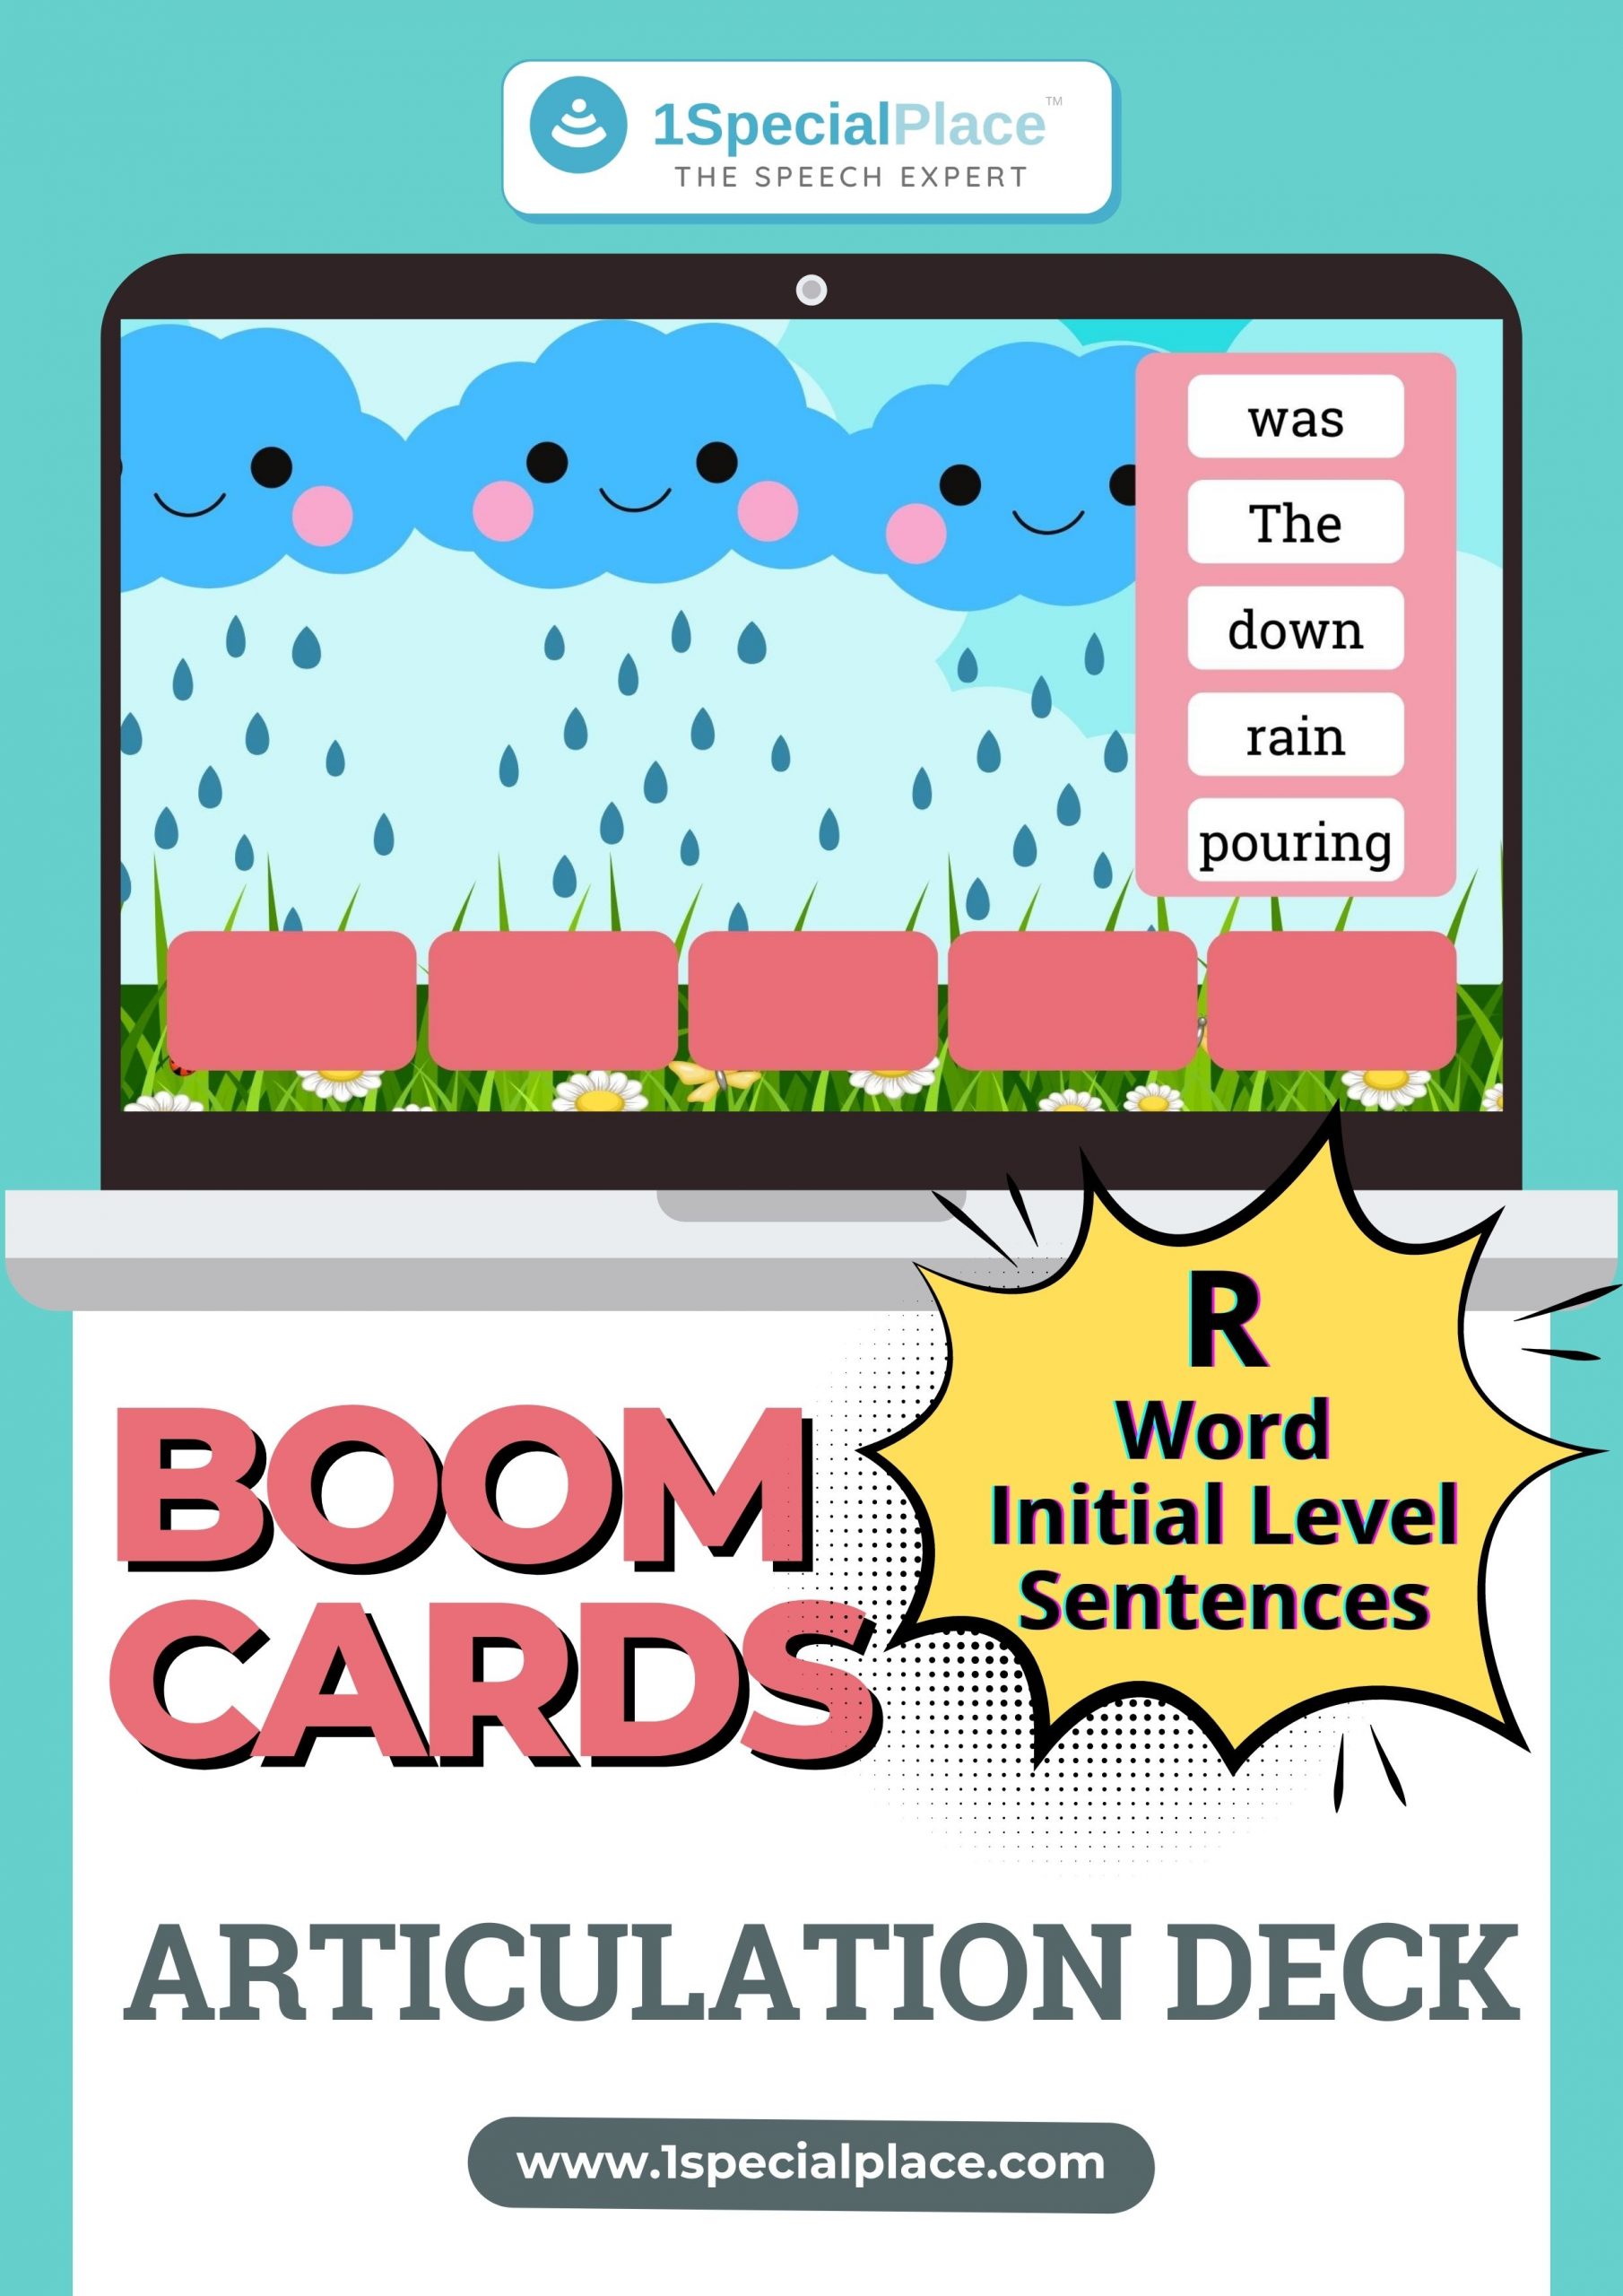 R word initial level sentences boom cards